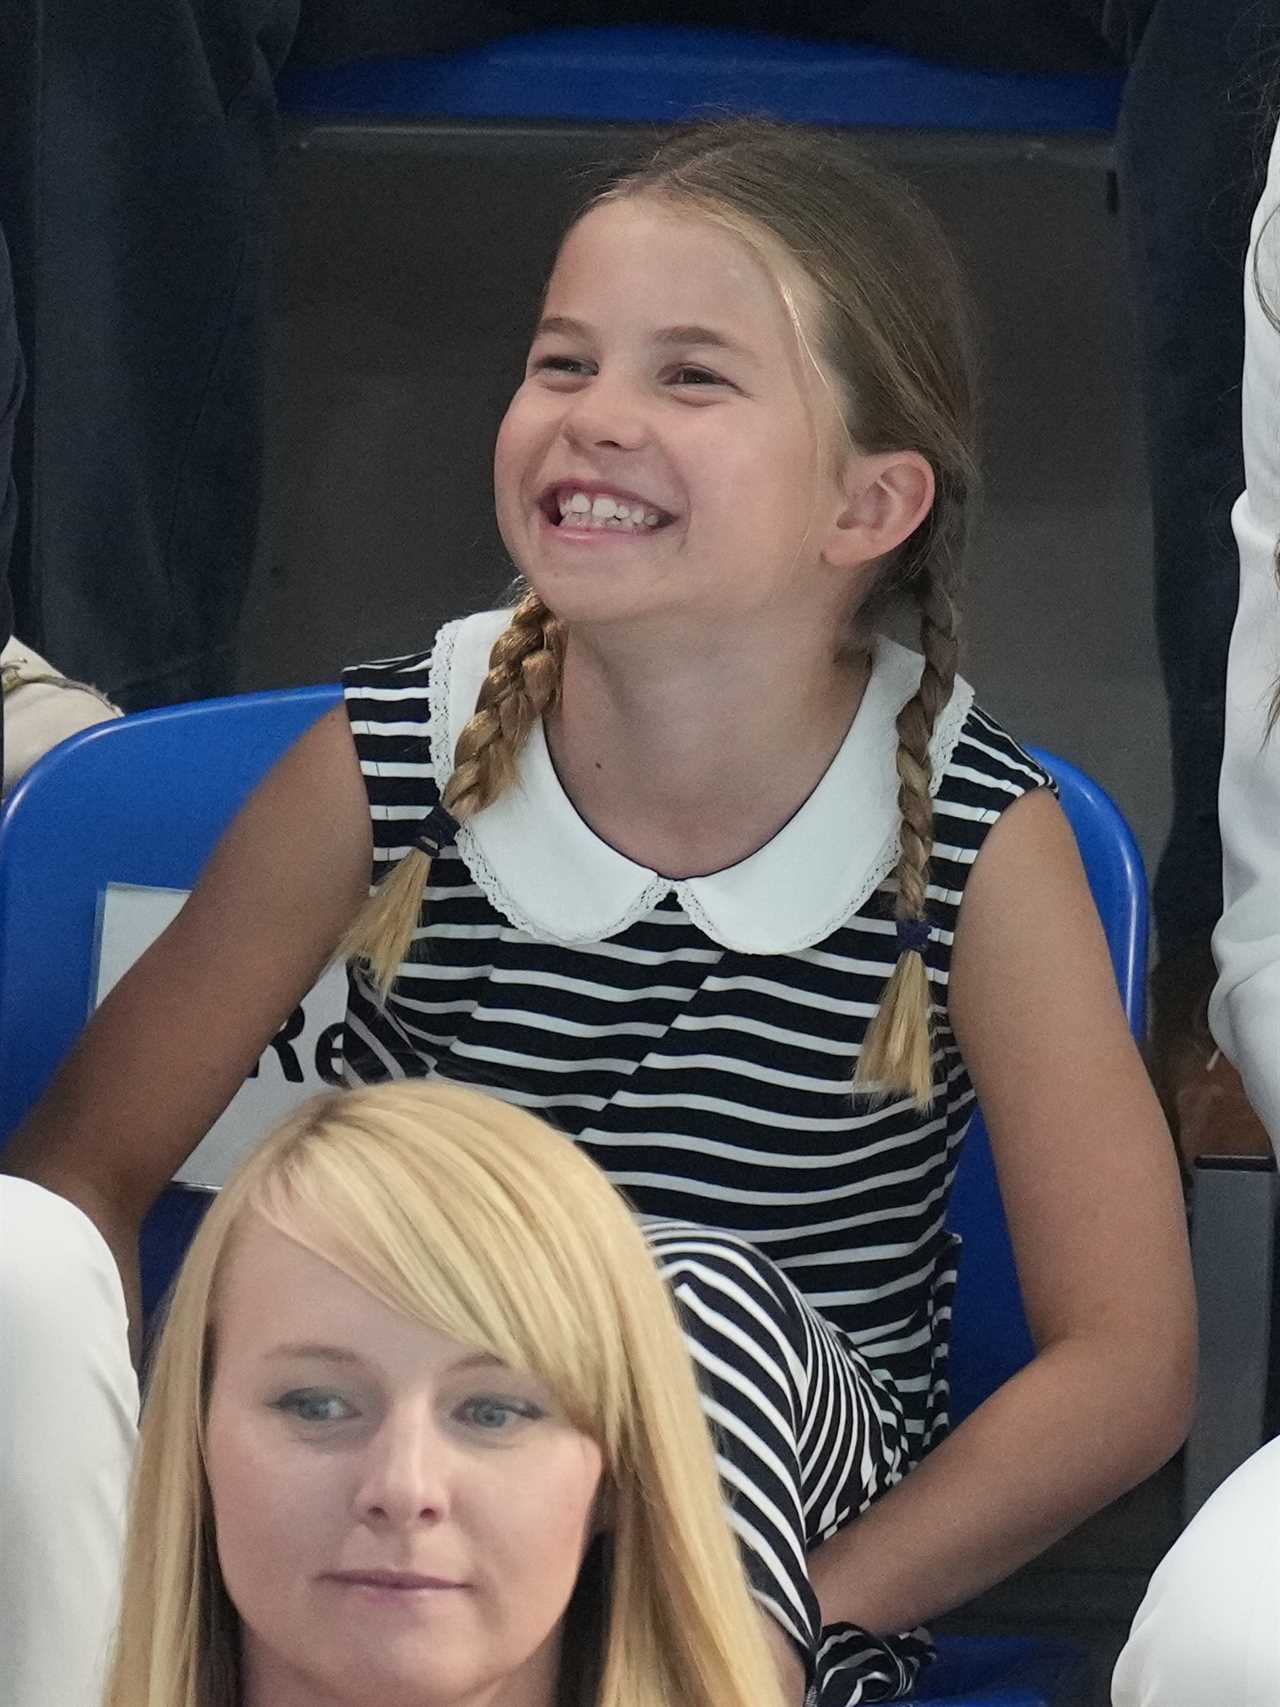 Princess Charlotte, 8, grins as she watches Commonwealth Games swimming race with mum Kate Middleton and Prince William